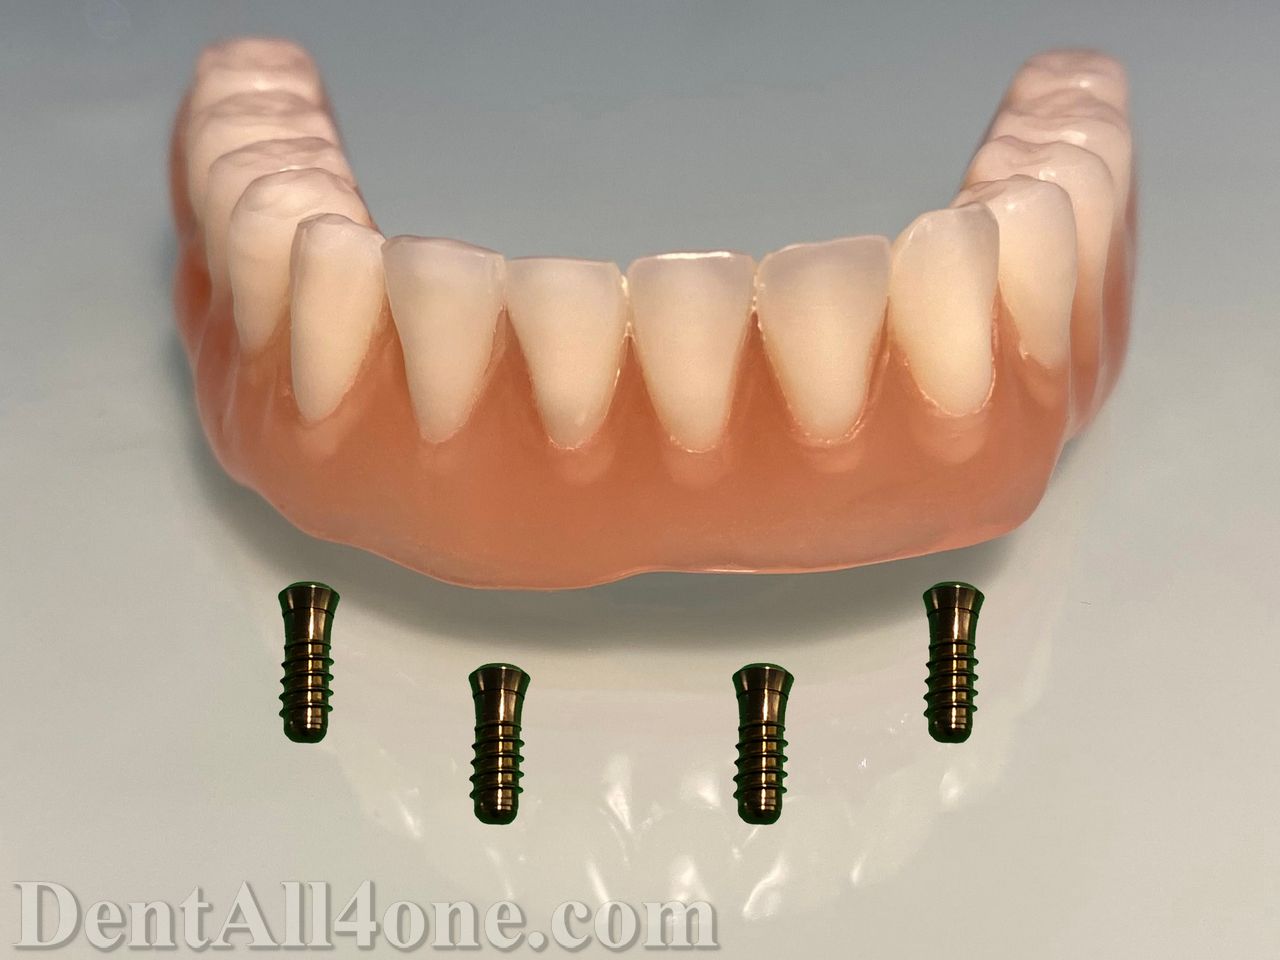 Vollprothese mit Implantat - www.dentall4one.com